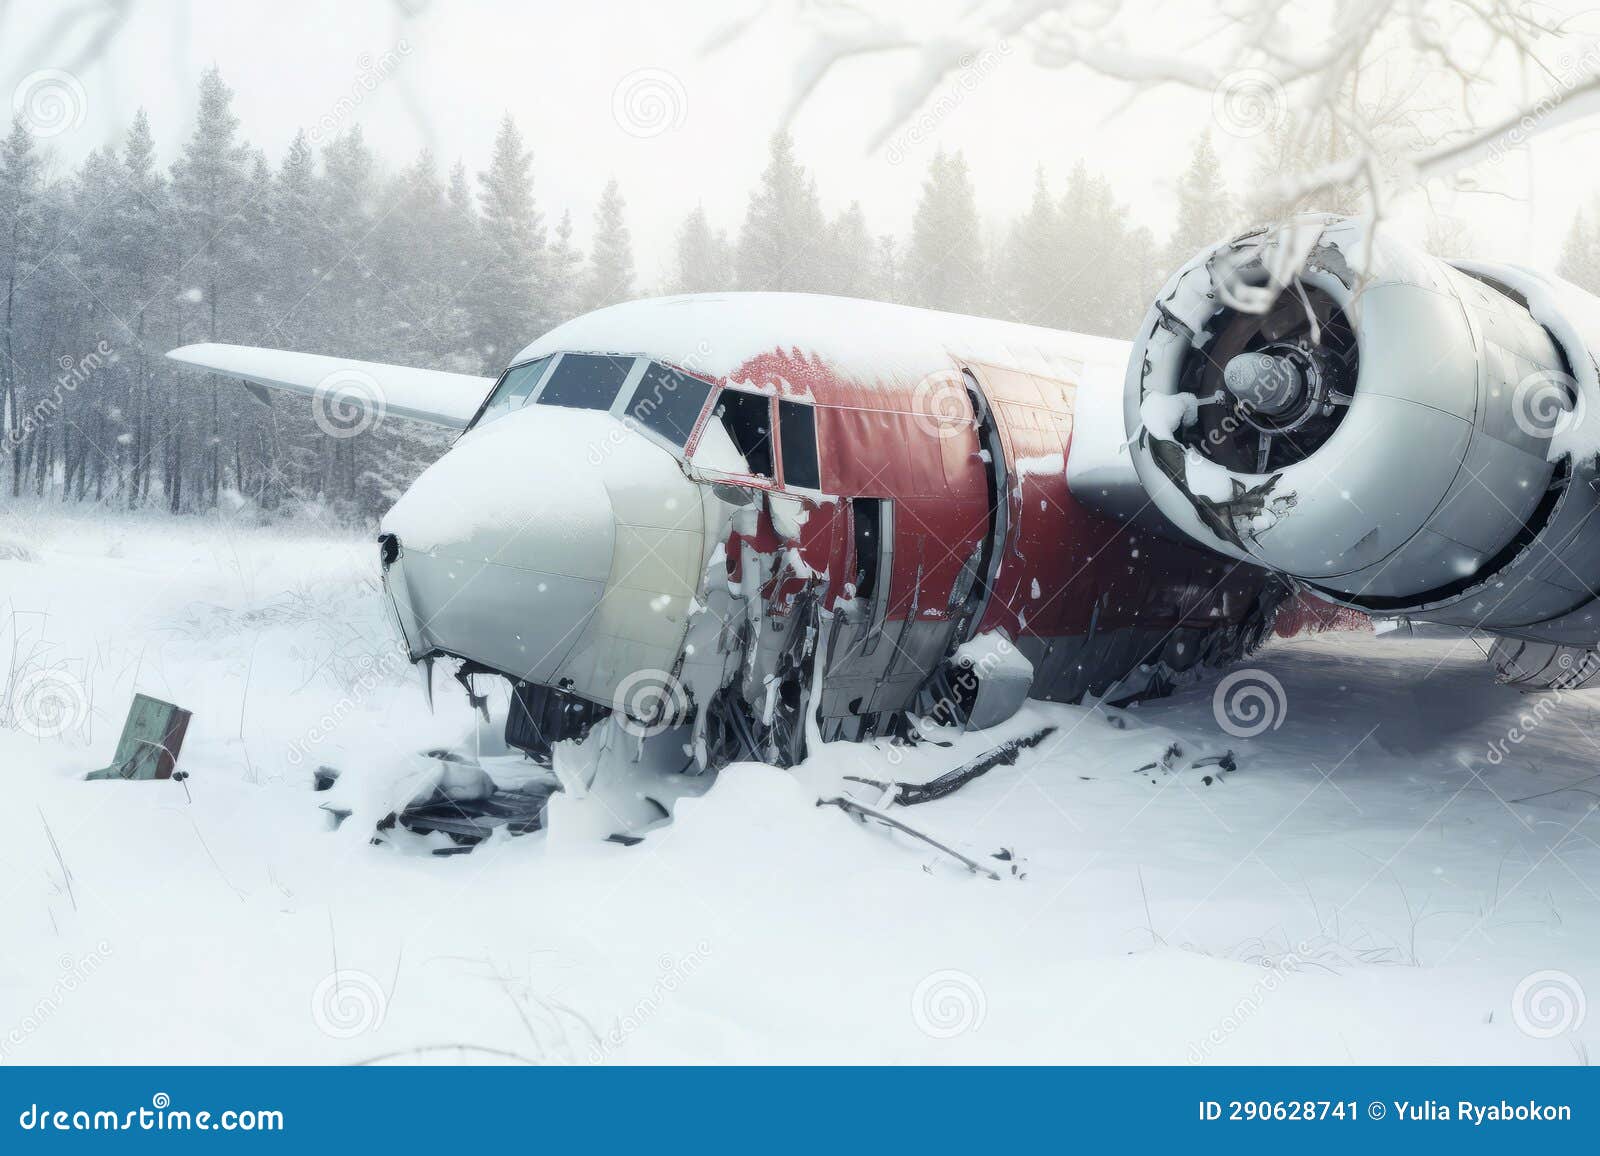 Aged aircraft after accident on uneven snowy land · Free Stock Photo